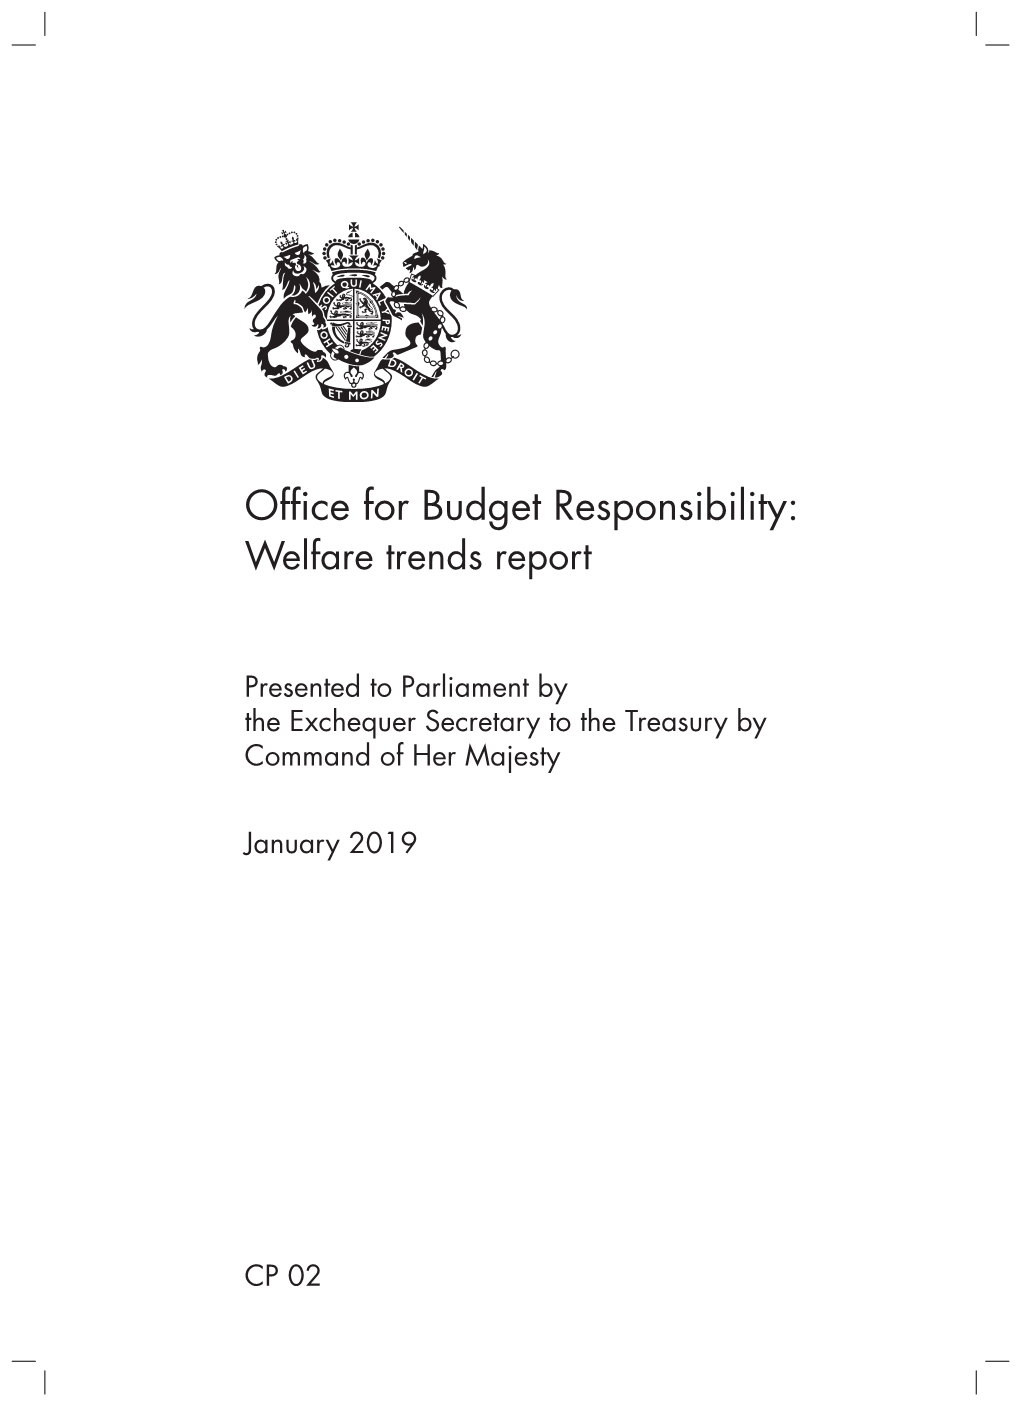 Office for Budget Responsibility: Welfare Trends Report